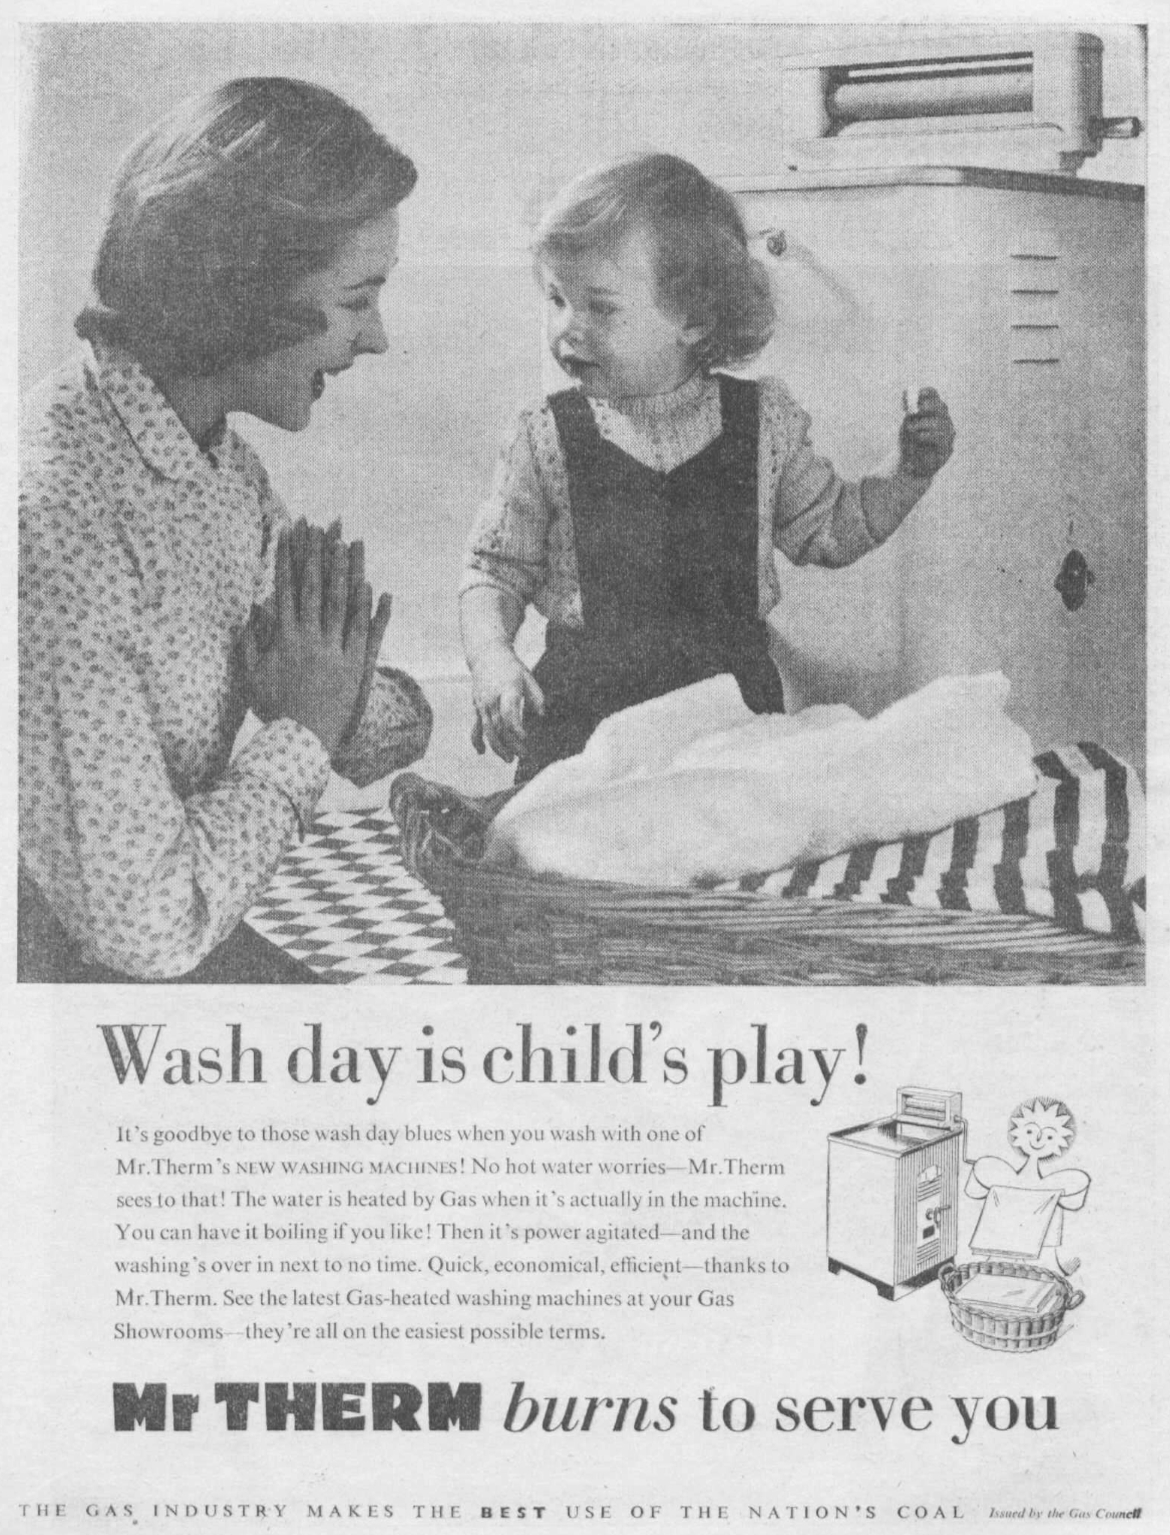 Wash day is child's play!